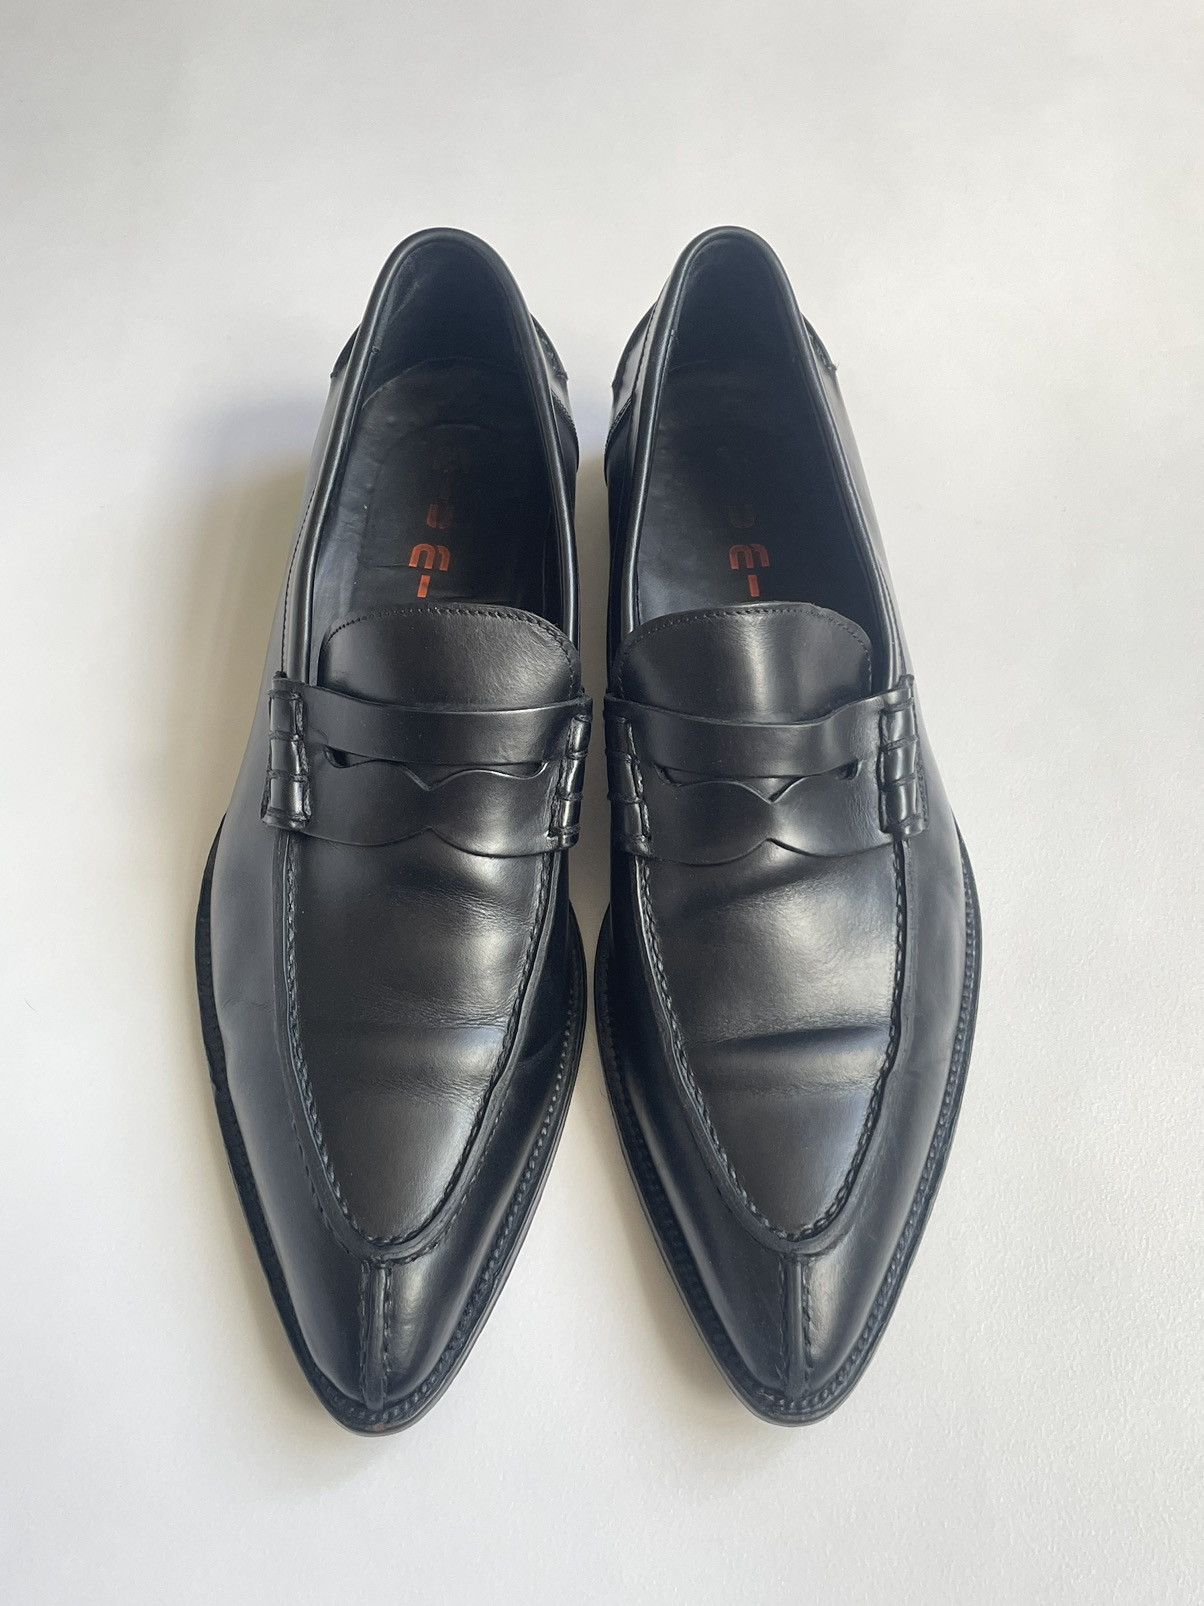 Prada Early 2000s Pointy Leather Loafers | Grailed